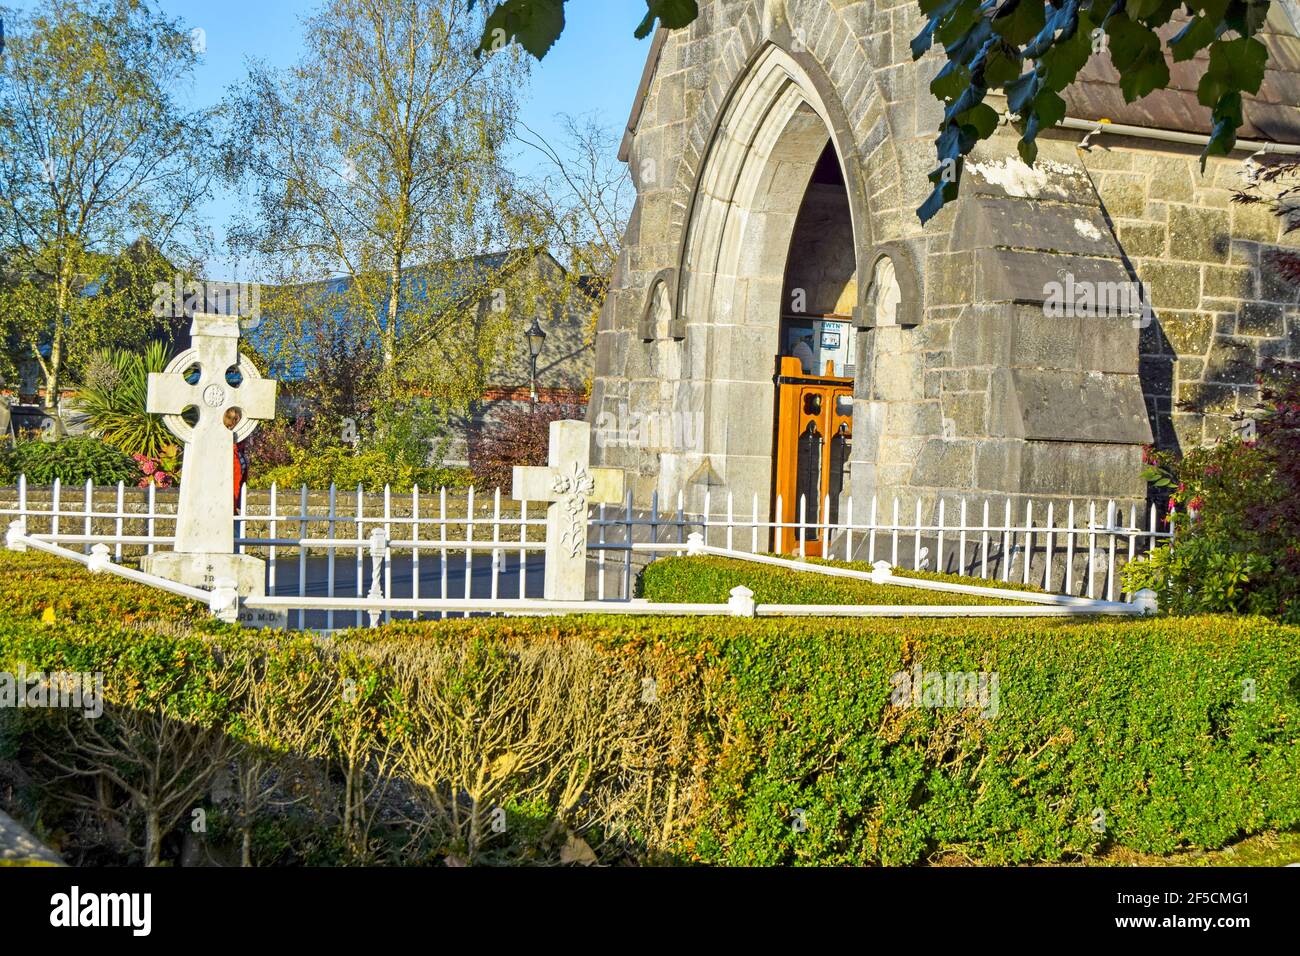 Holy Trinity Abbey church with celtic crosses in front, Adare, County Limerick, Ireland Stock Photo